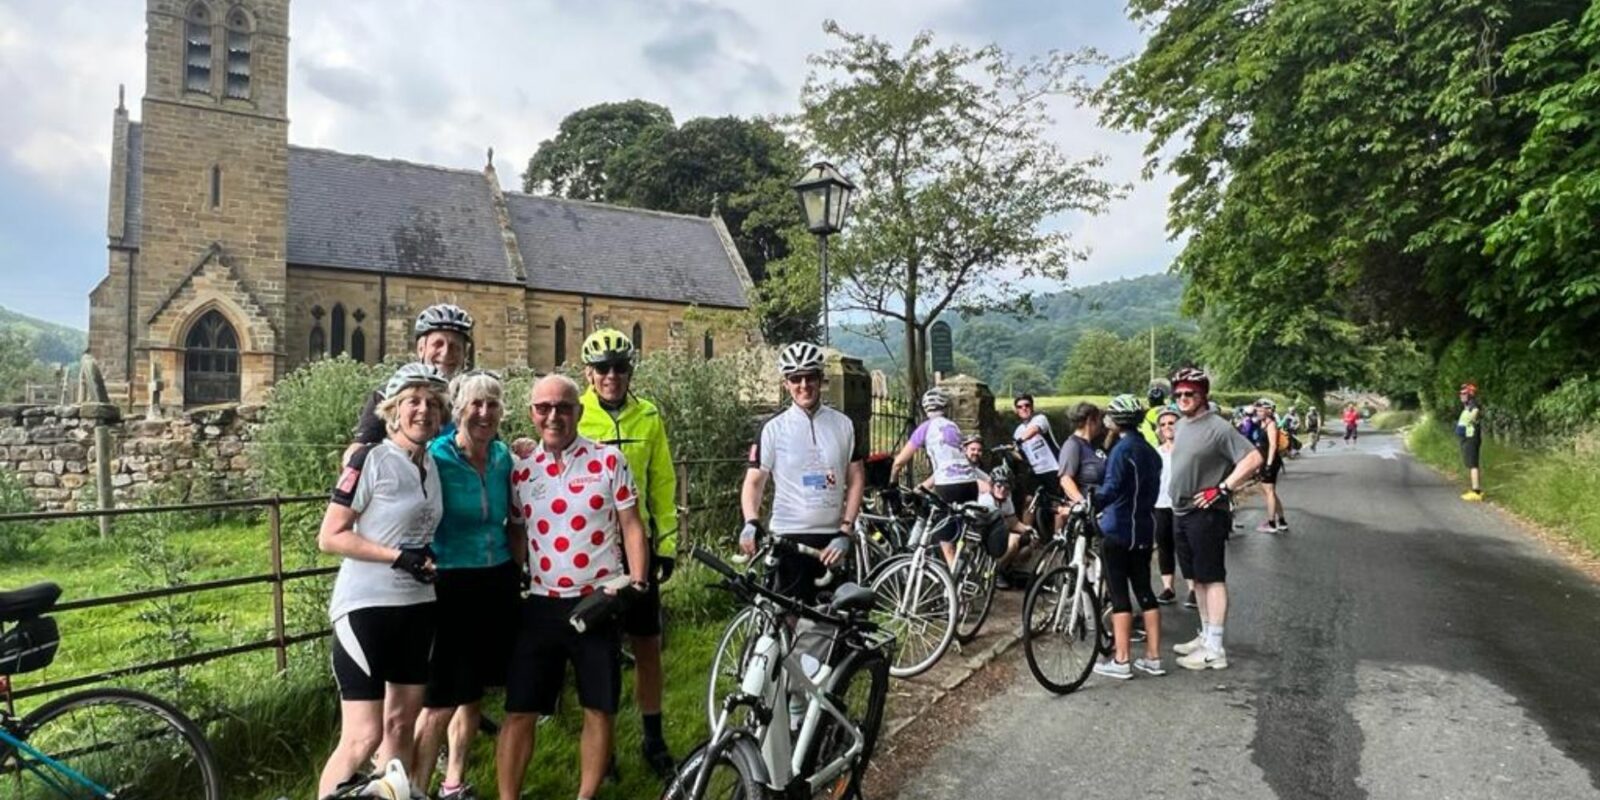 Group of cyclists standing in front of a church